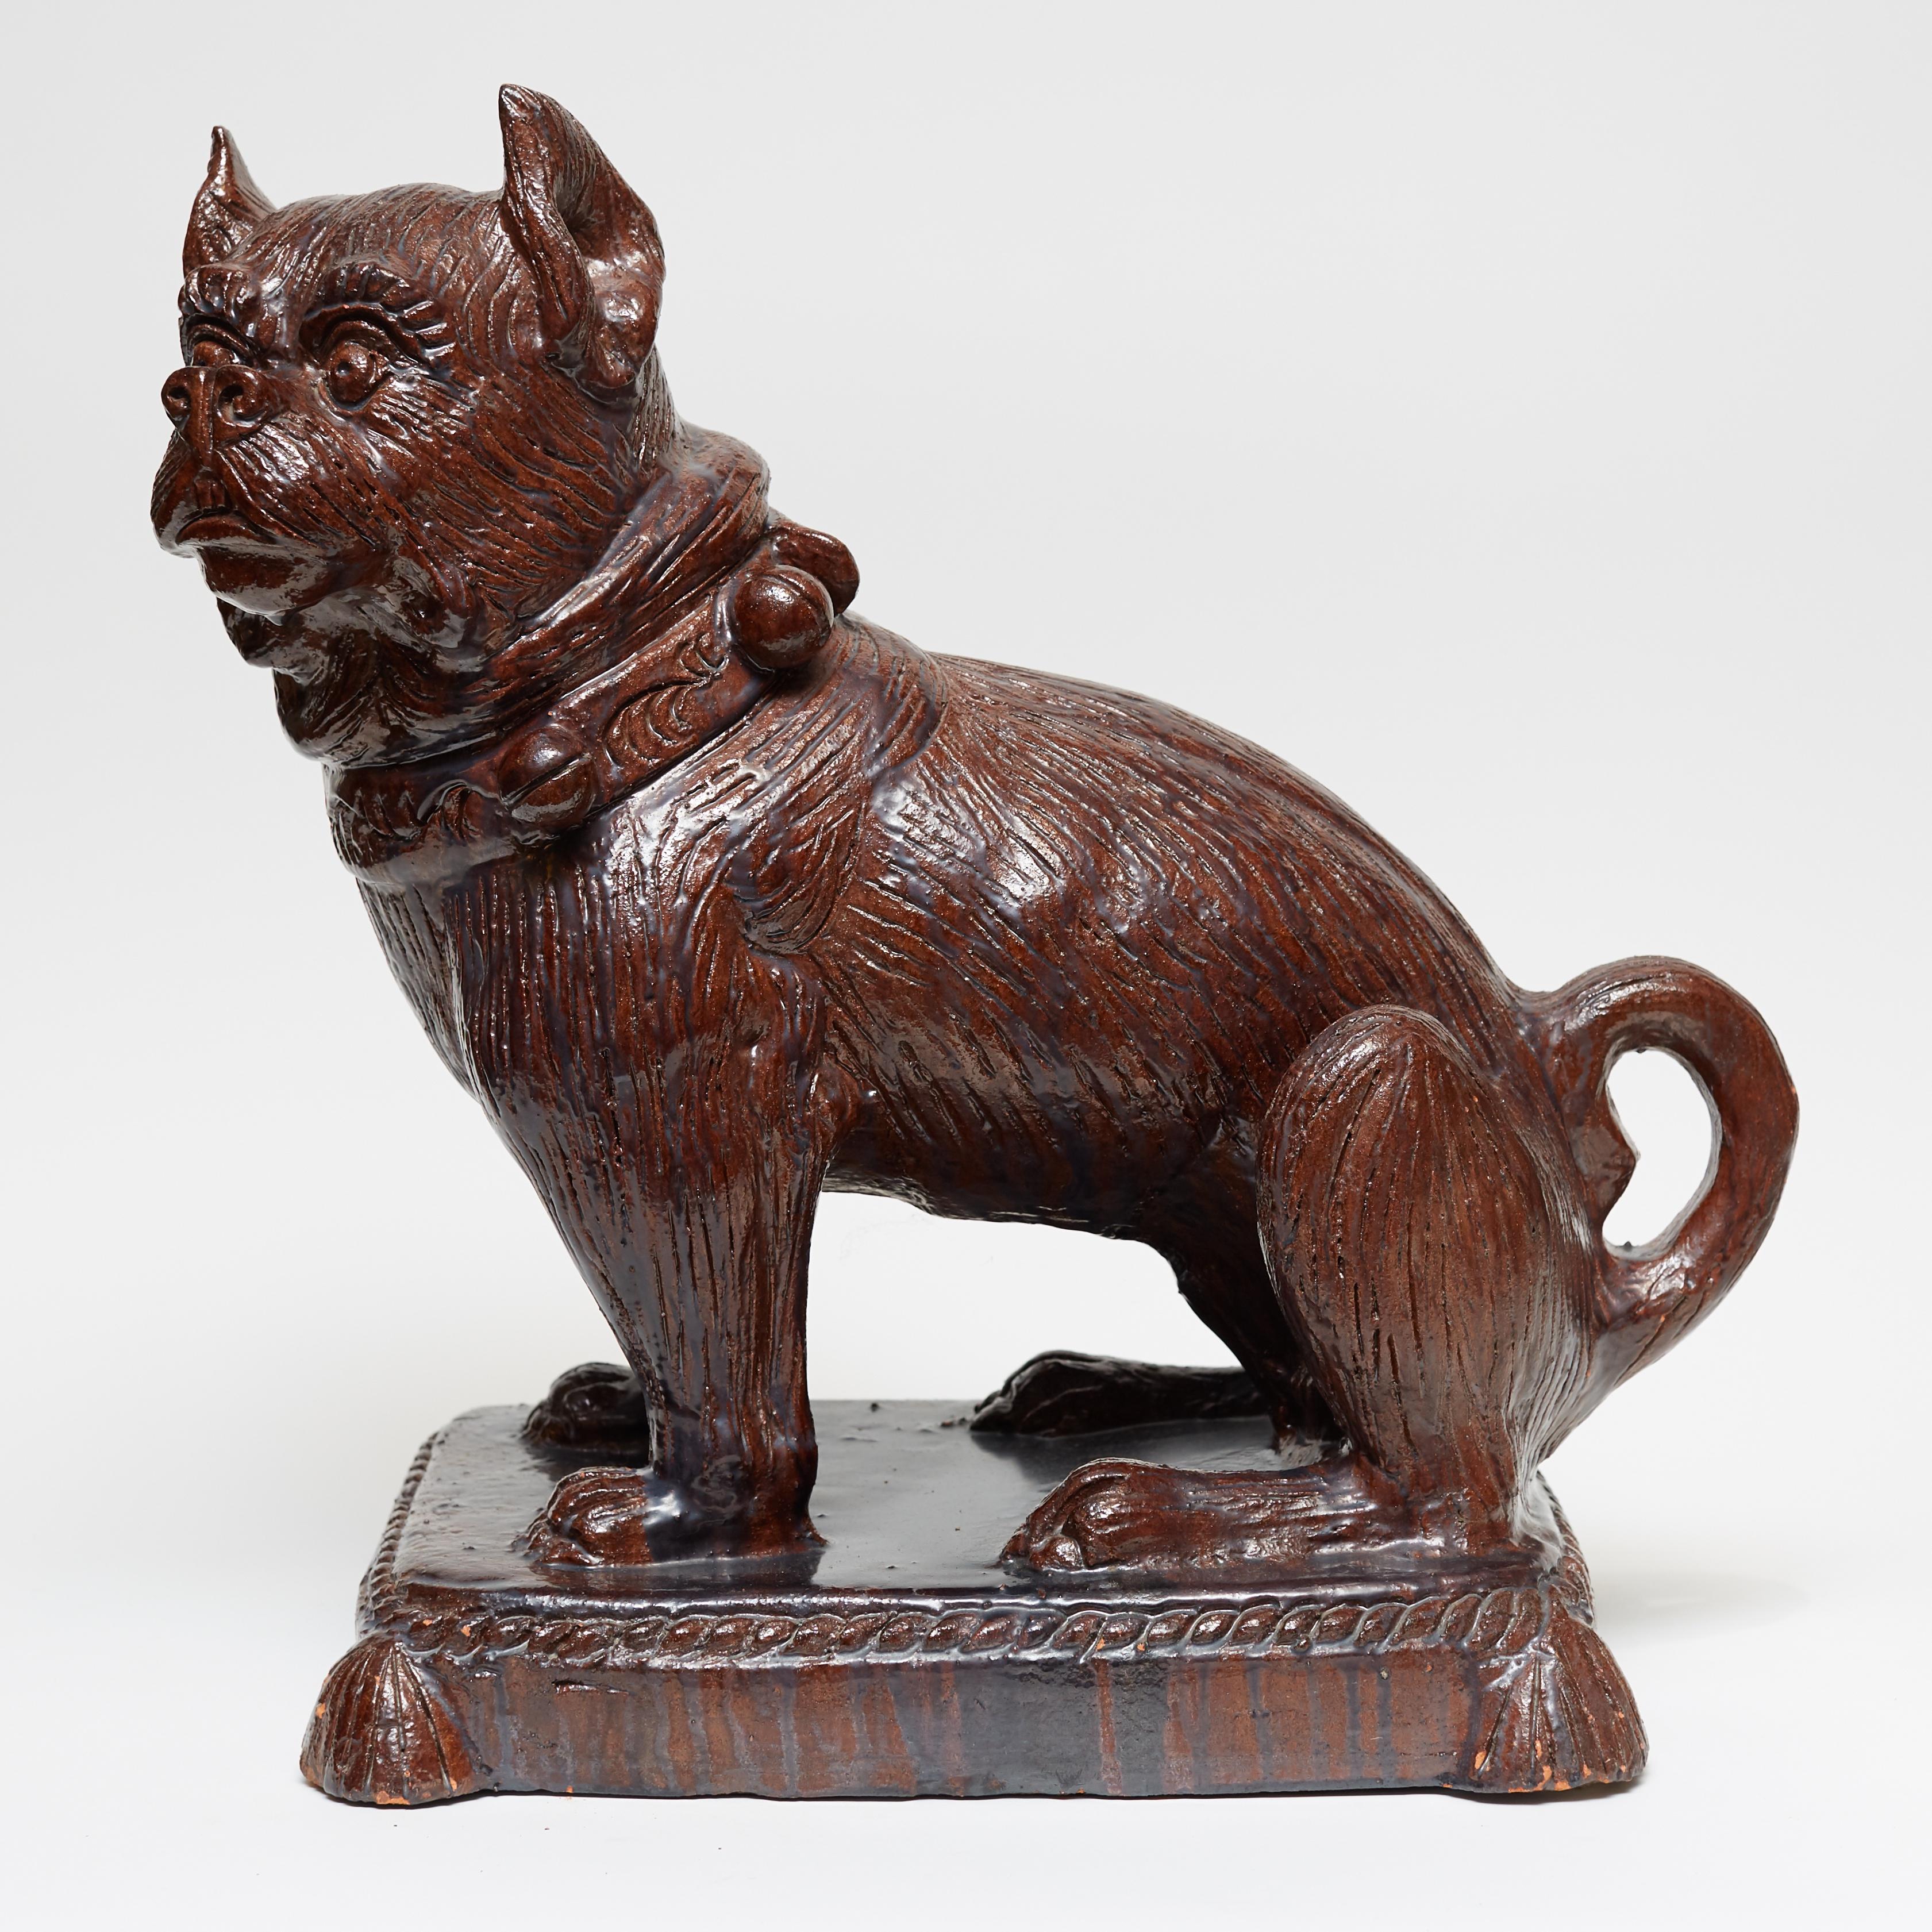 German figure of a seated bulldog on tasseled pillow carved from terracotta with a carmel brown glazed finish.